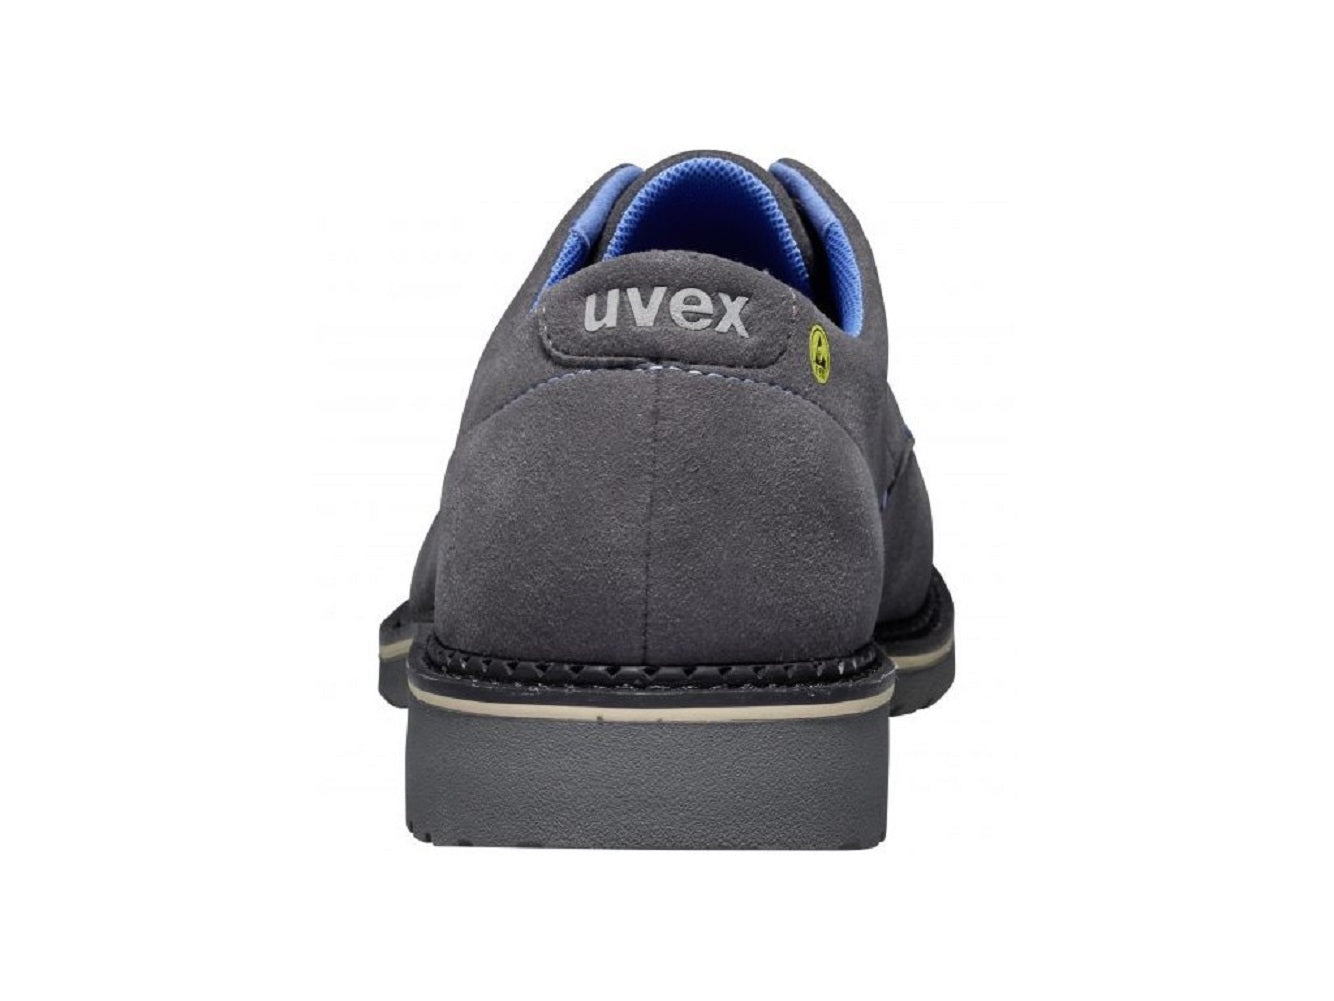 Uvex 84698 Steel Toe Capped Mens Safety Business Shoes